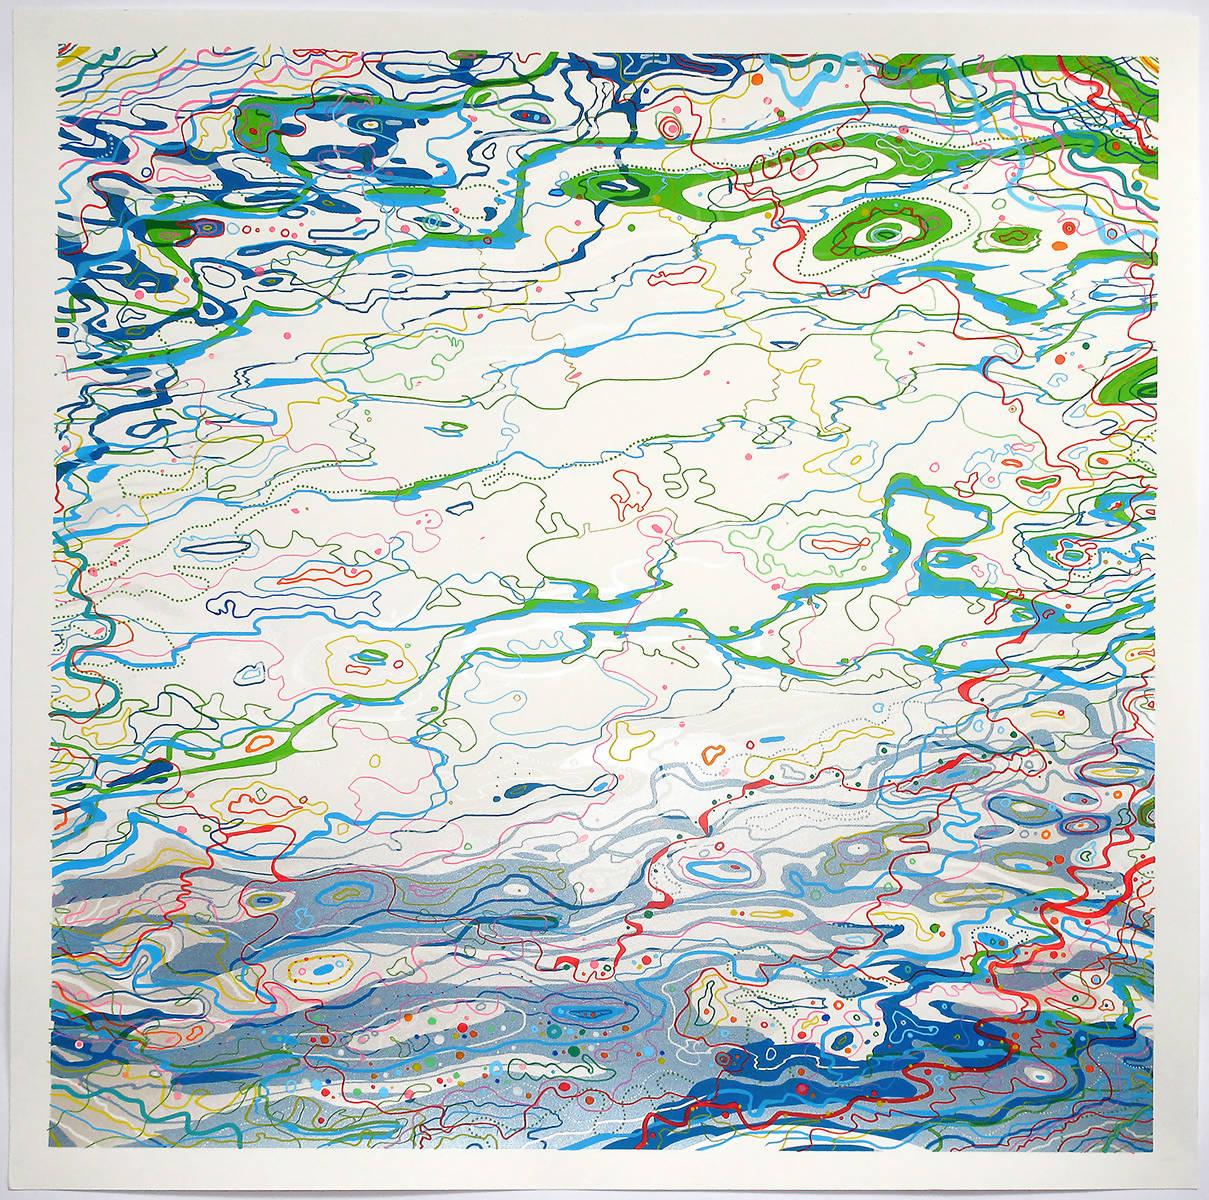 Chris Keegan Print - Ripples of Colour, Art print, Abstract, Water, Line art, Blue green, red, white 